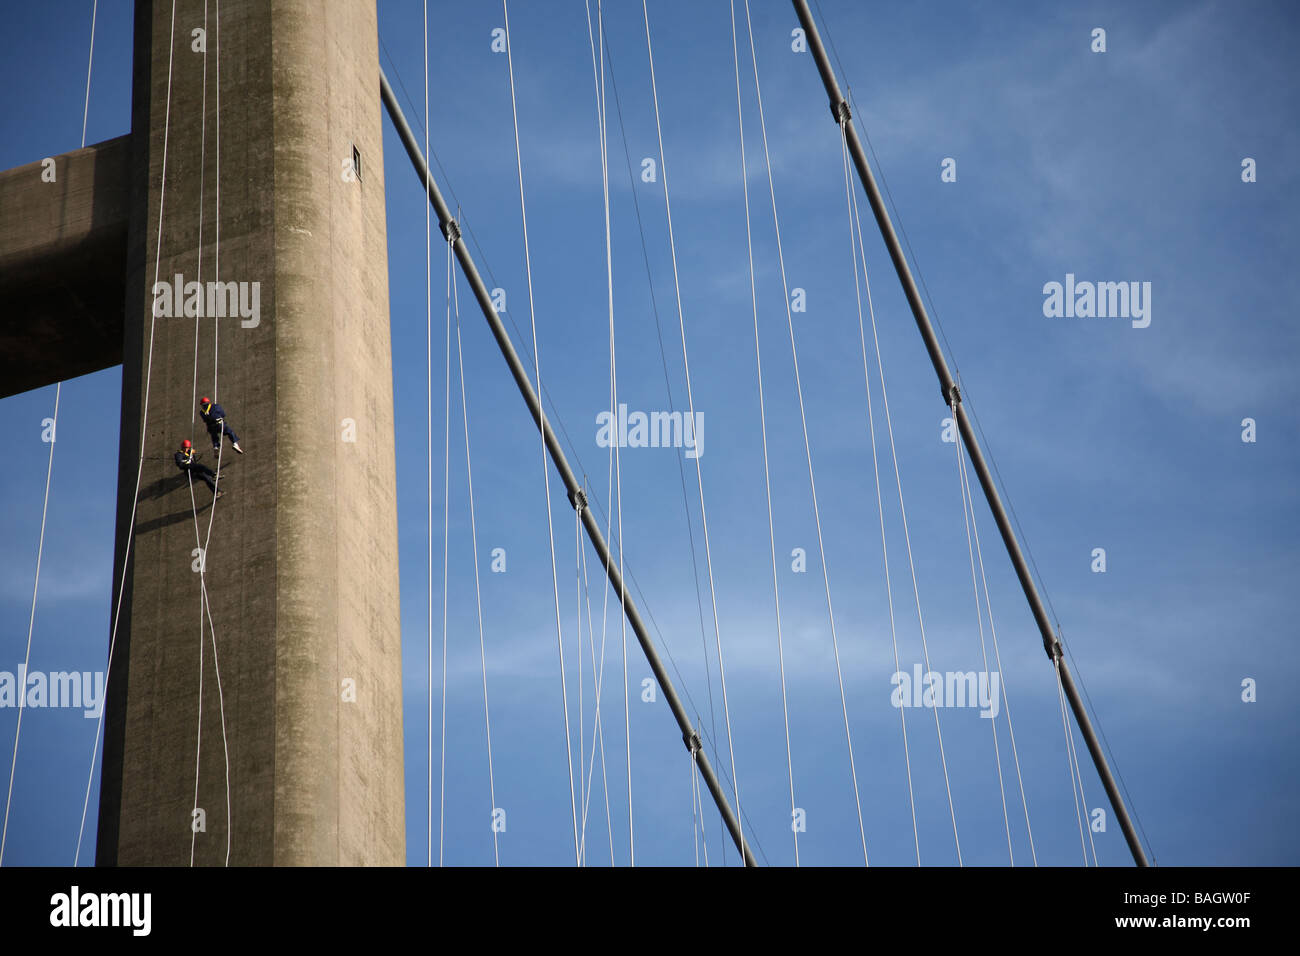 Rappelling on The Humber Bridge in Hull, England Stock Photo